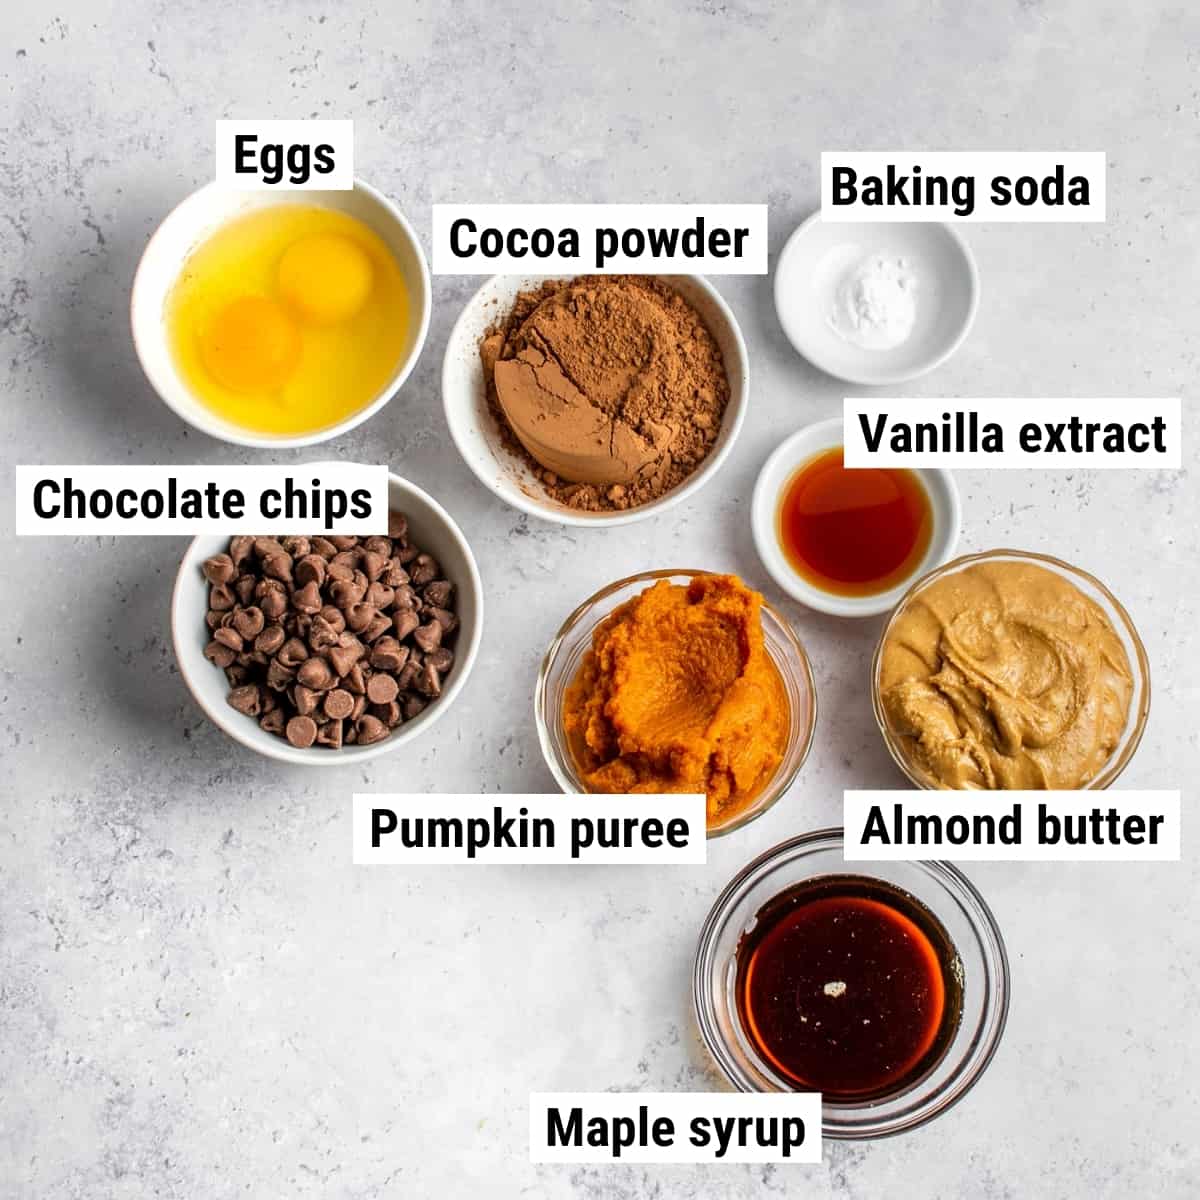 The ingredients used to make healthy pumpkin brownies laid out on a table.